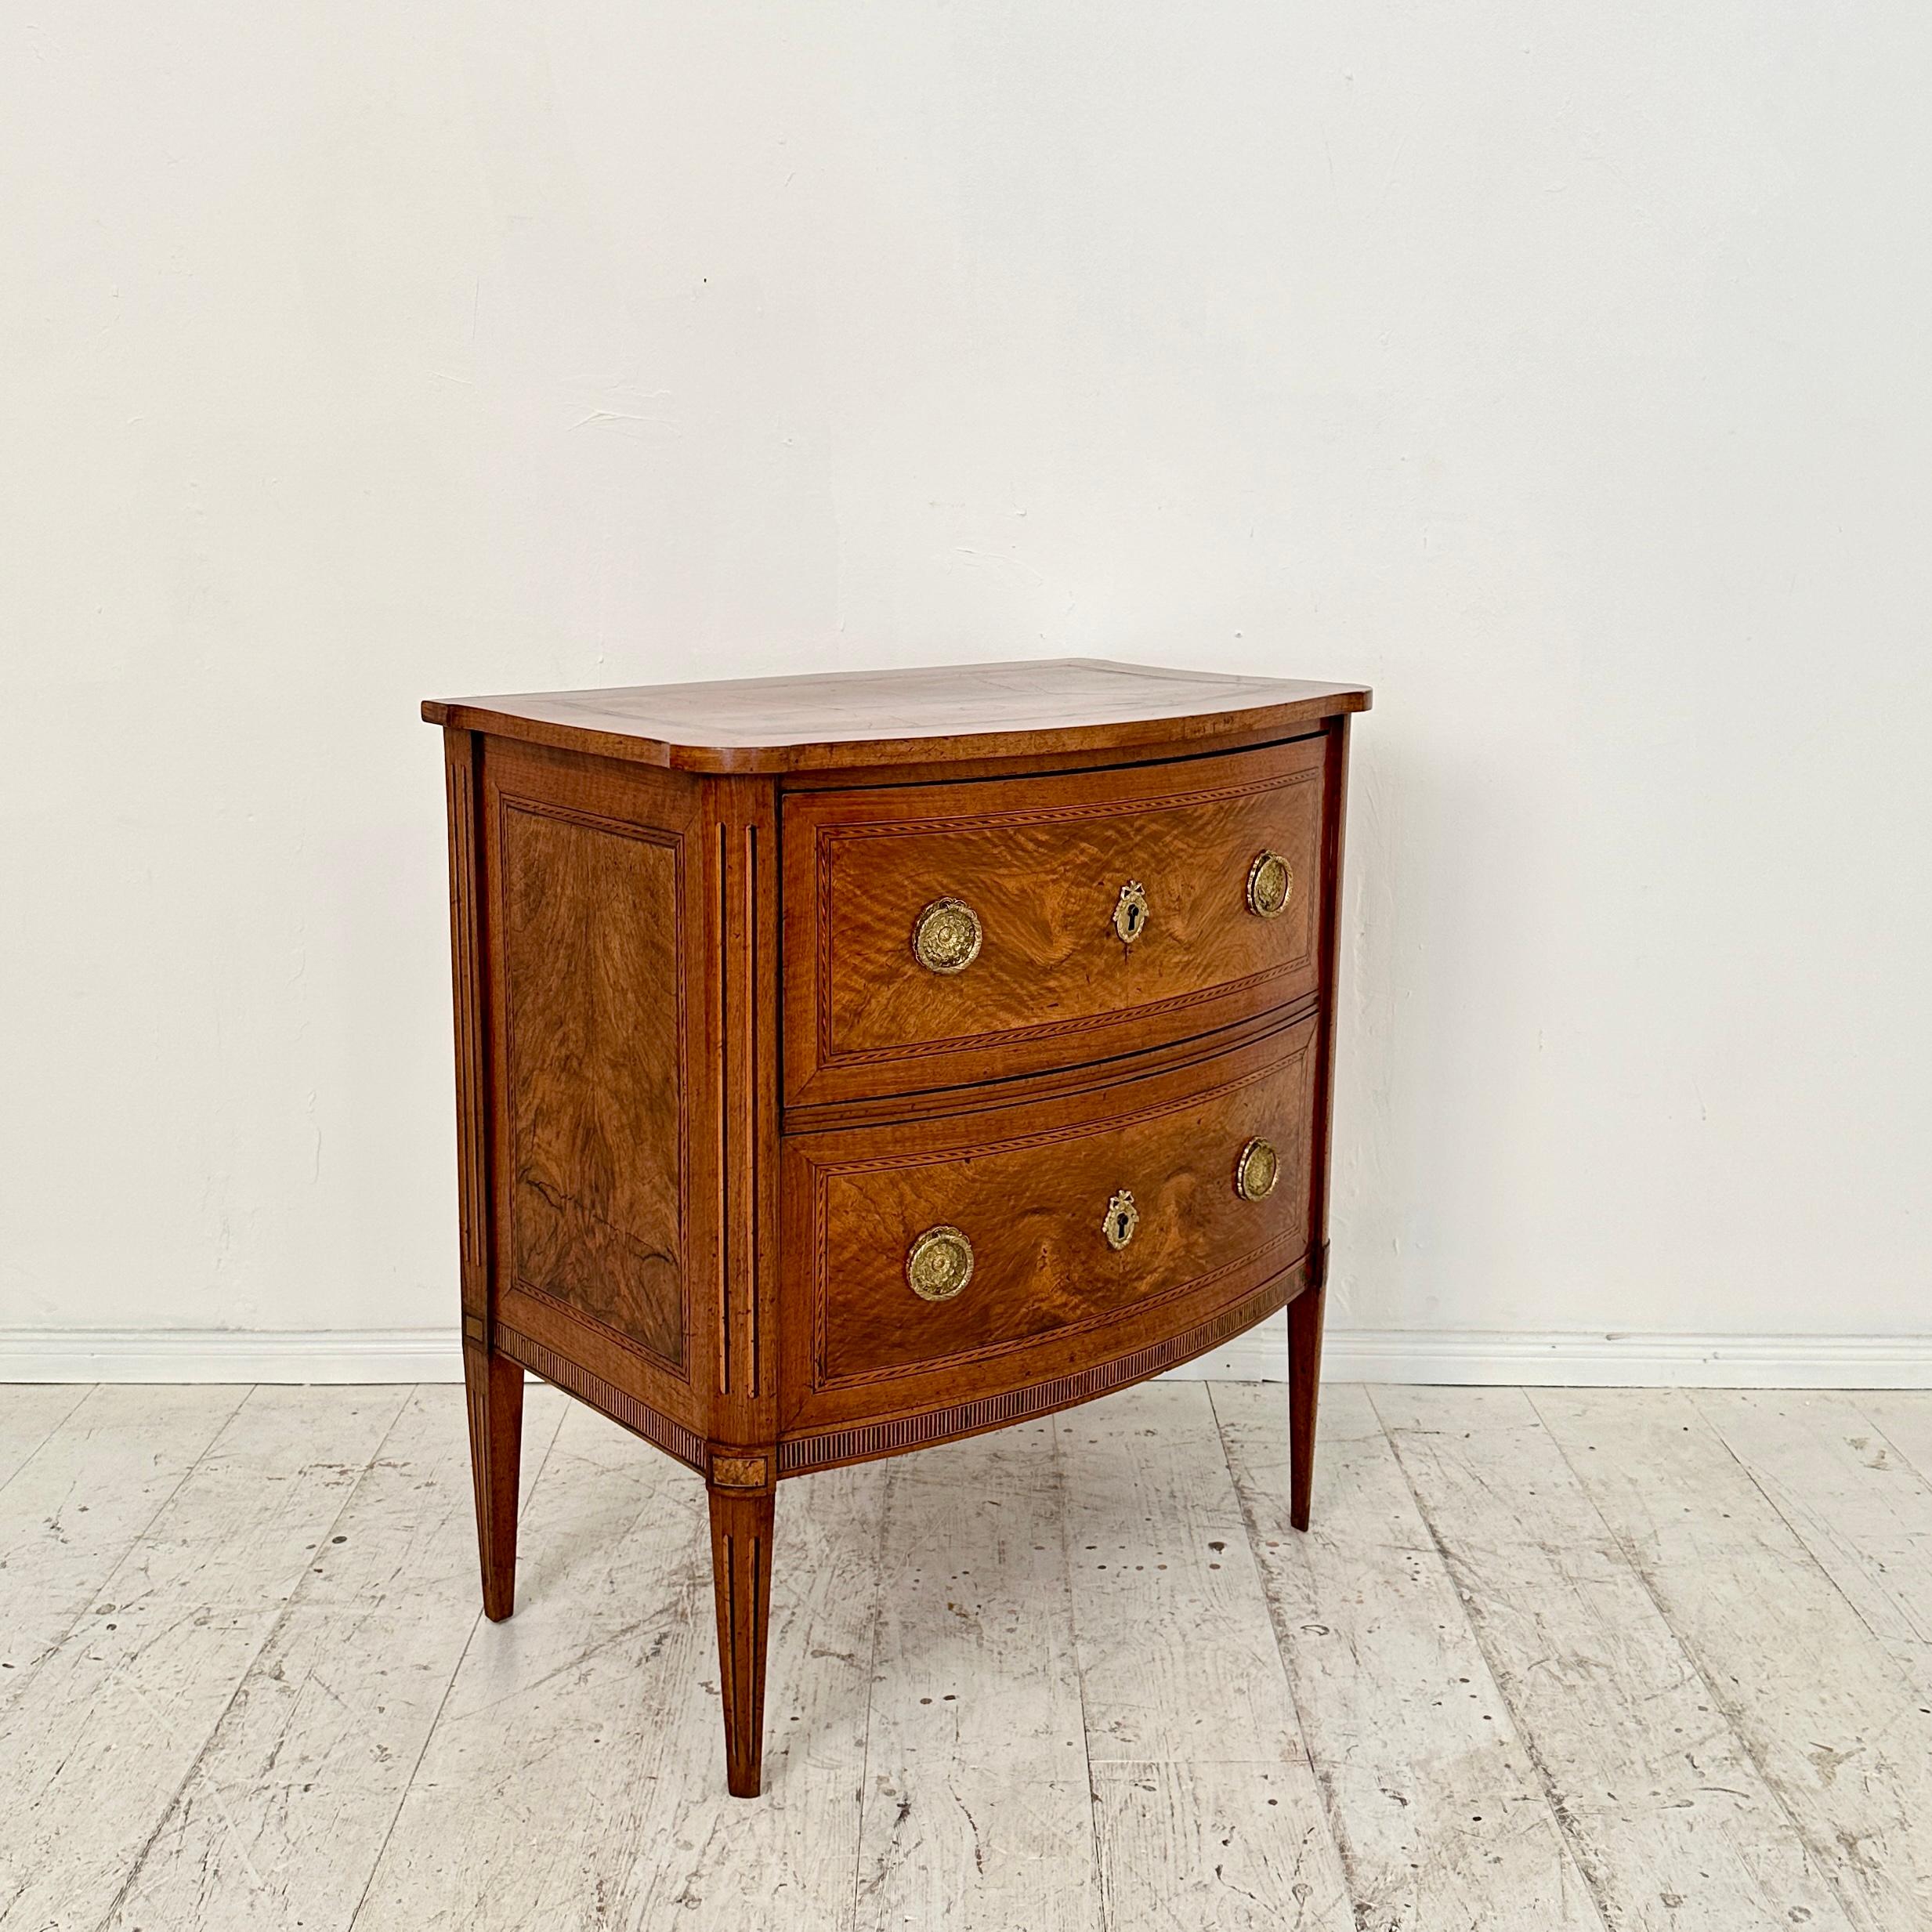 Crafted in the opulent style of Louis Seize during the late 18th century, this Small German Commode in Walnut with Two Drawers stands as a refined testament to the elegance of the era. Made from walnut veneer, it exudes a timeless charm, showcasing